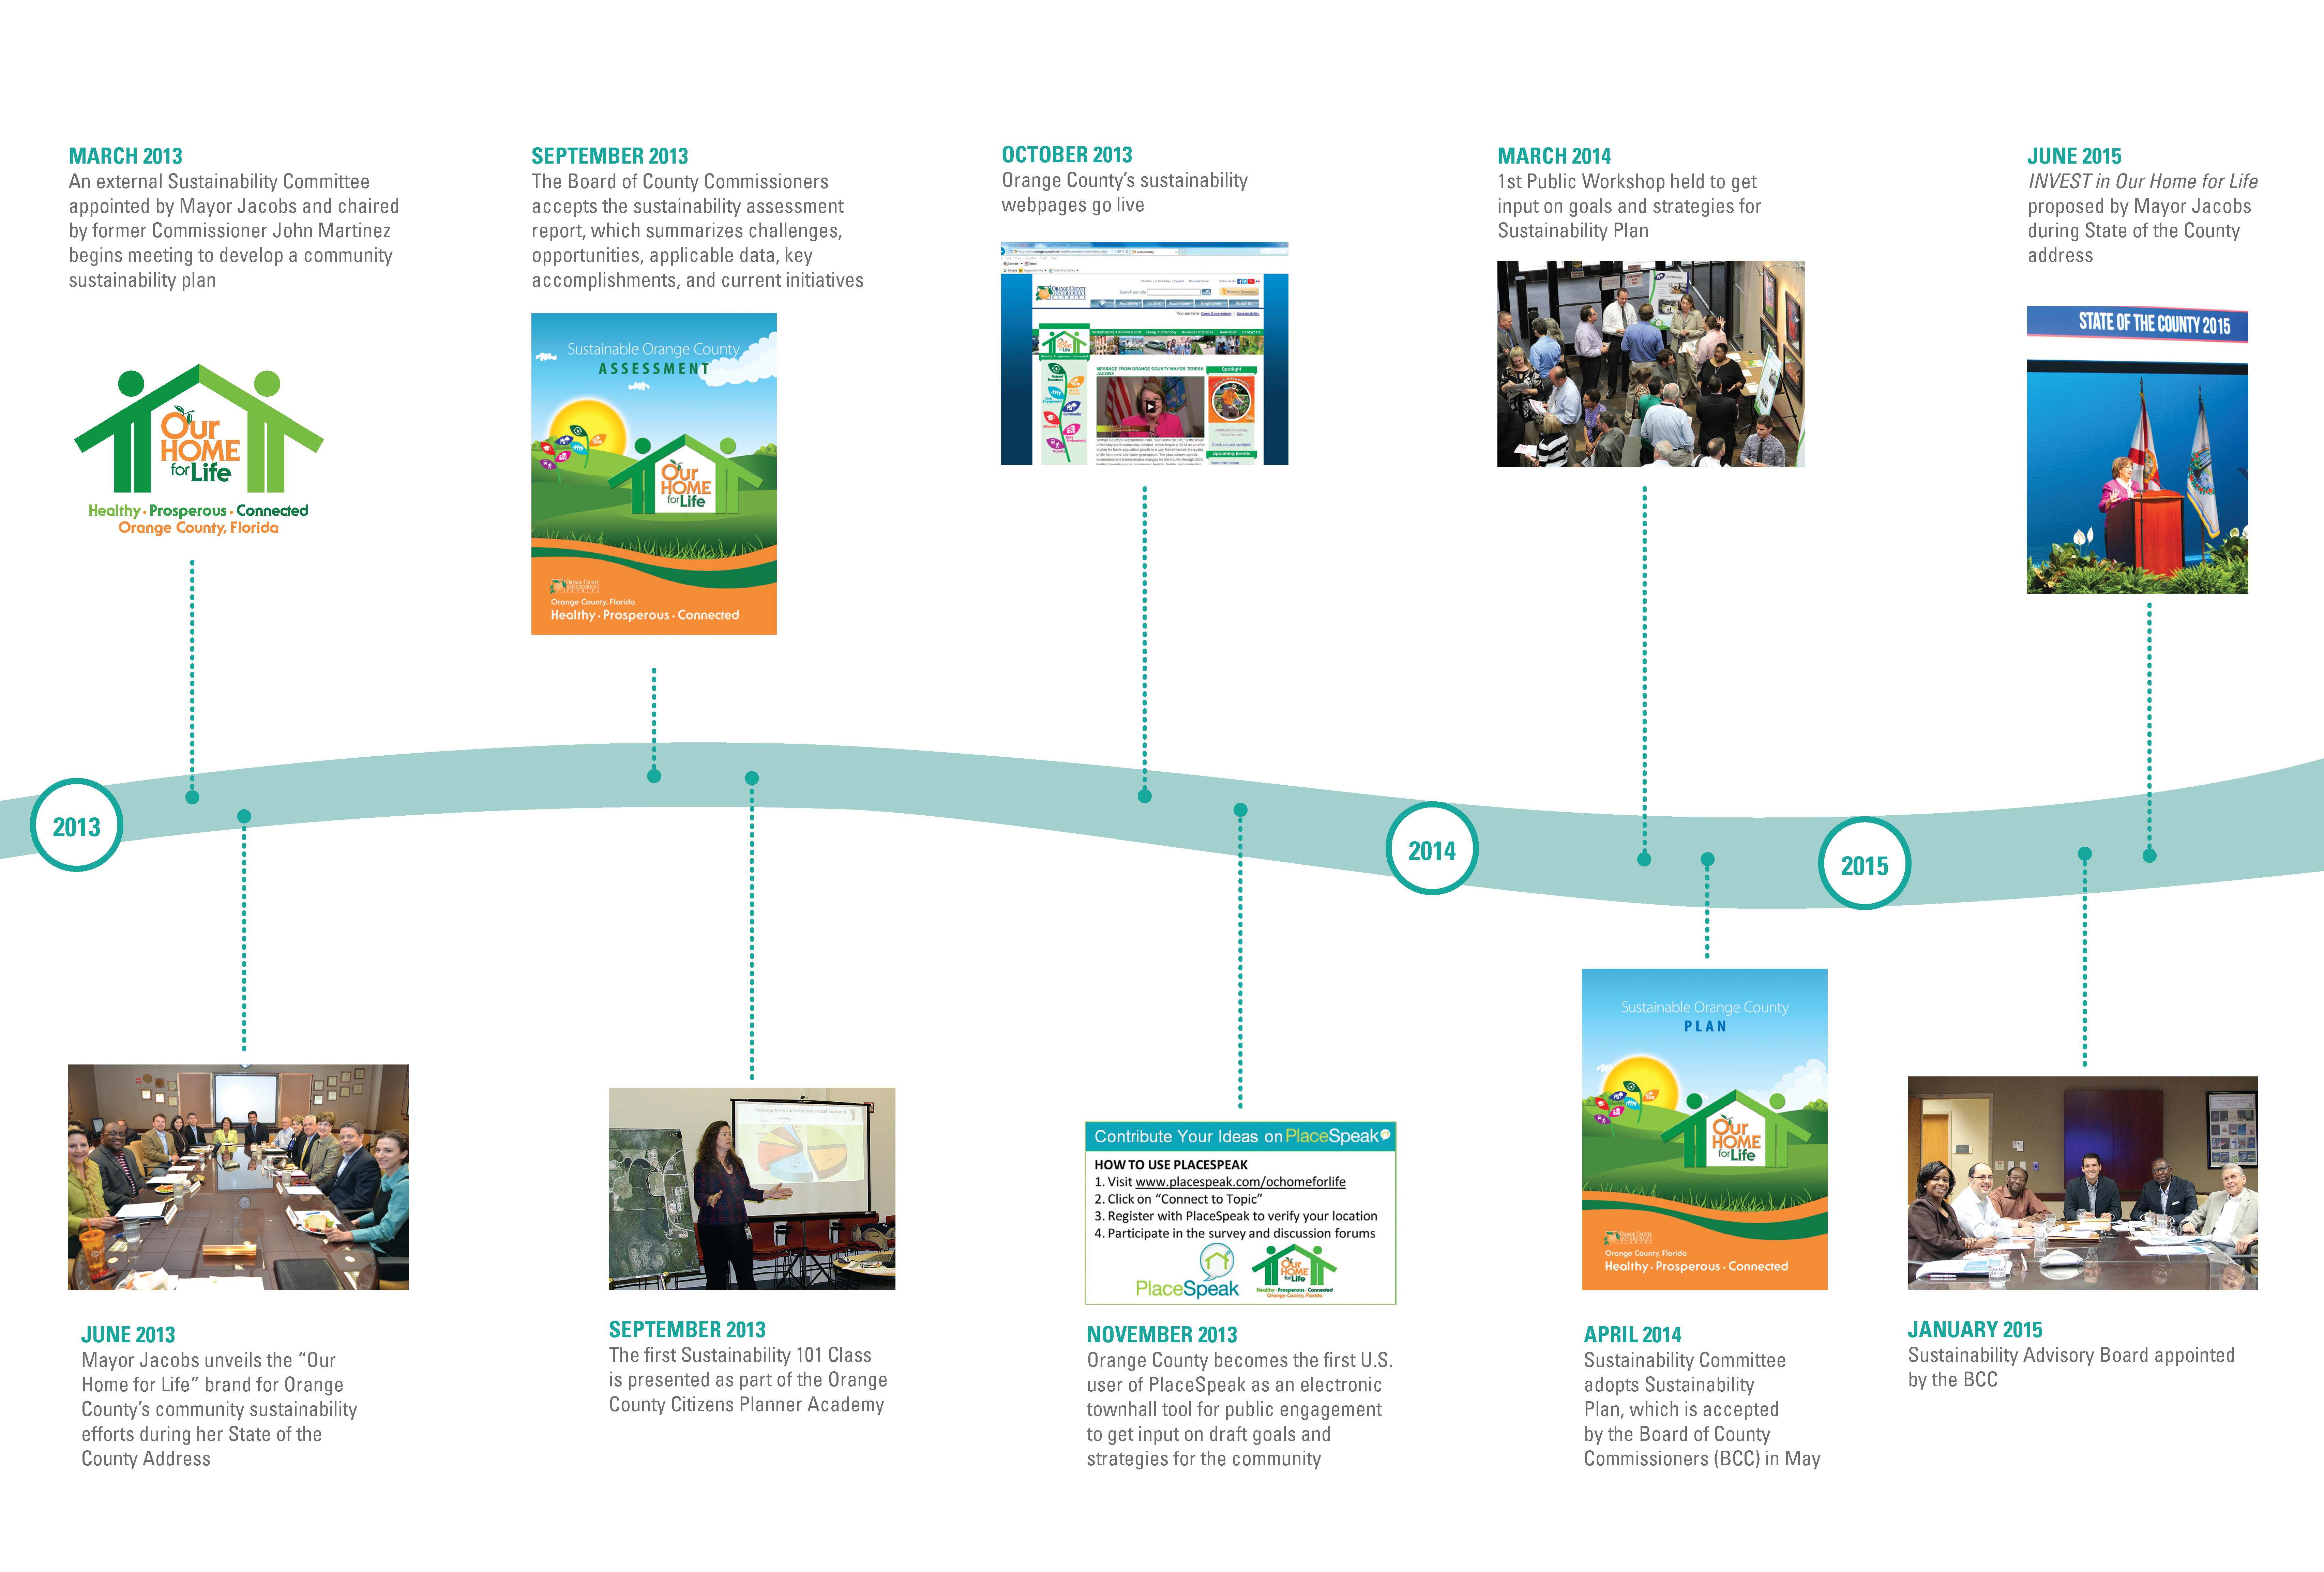 Graphic depicting the journey of the Orange County Sustainability Initiative